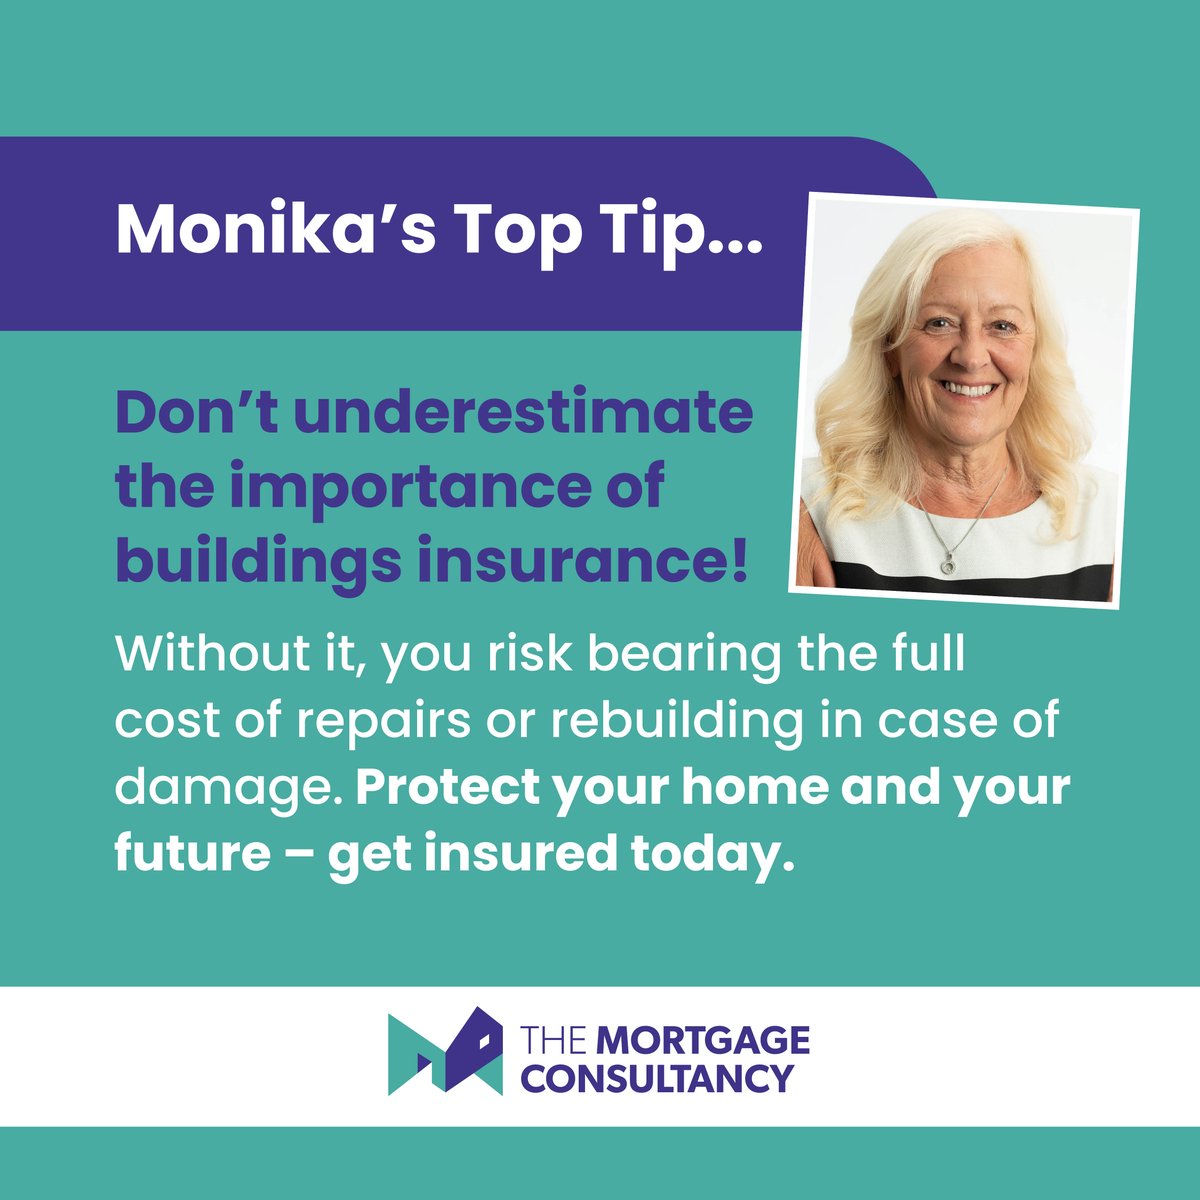 🏡 Monika's top tip: Don't underestimate the importance of buildings insurance! Without it, you risk bearing the full cost of repairs or rebuilding in case of damage. Protect your home and your future – get insured today.

#MortgageBroker #Kent #Mortgages #MortgageAdvisor